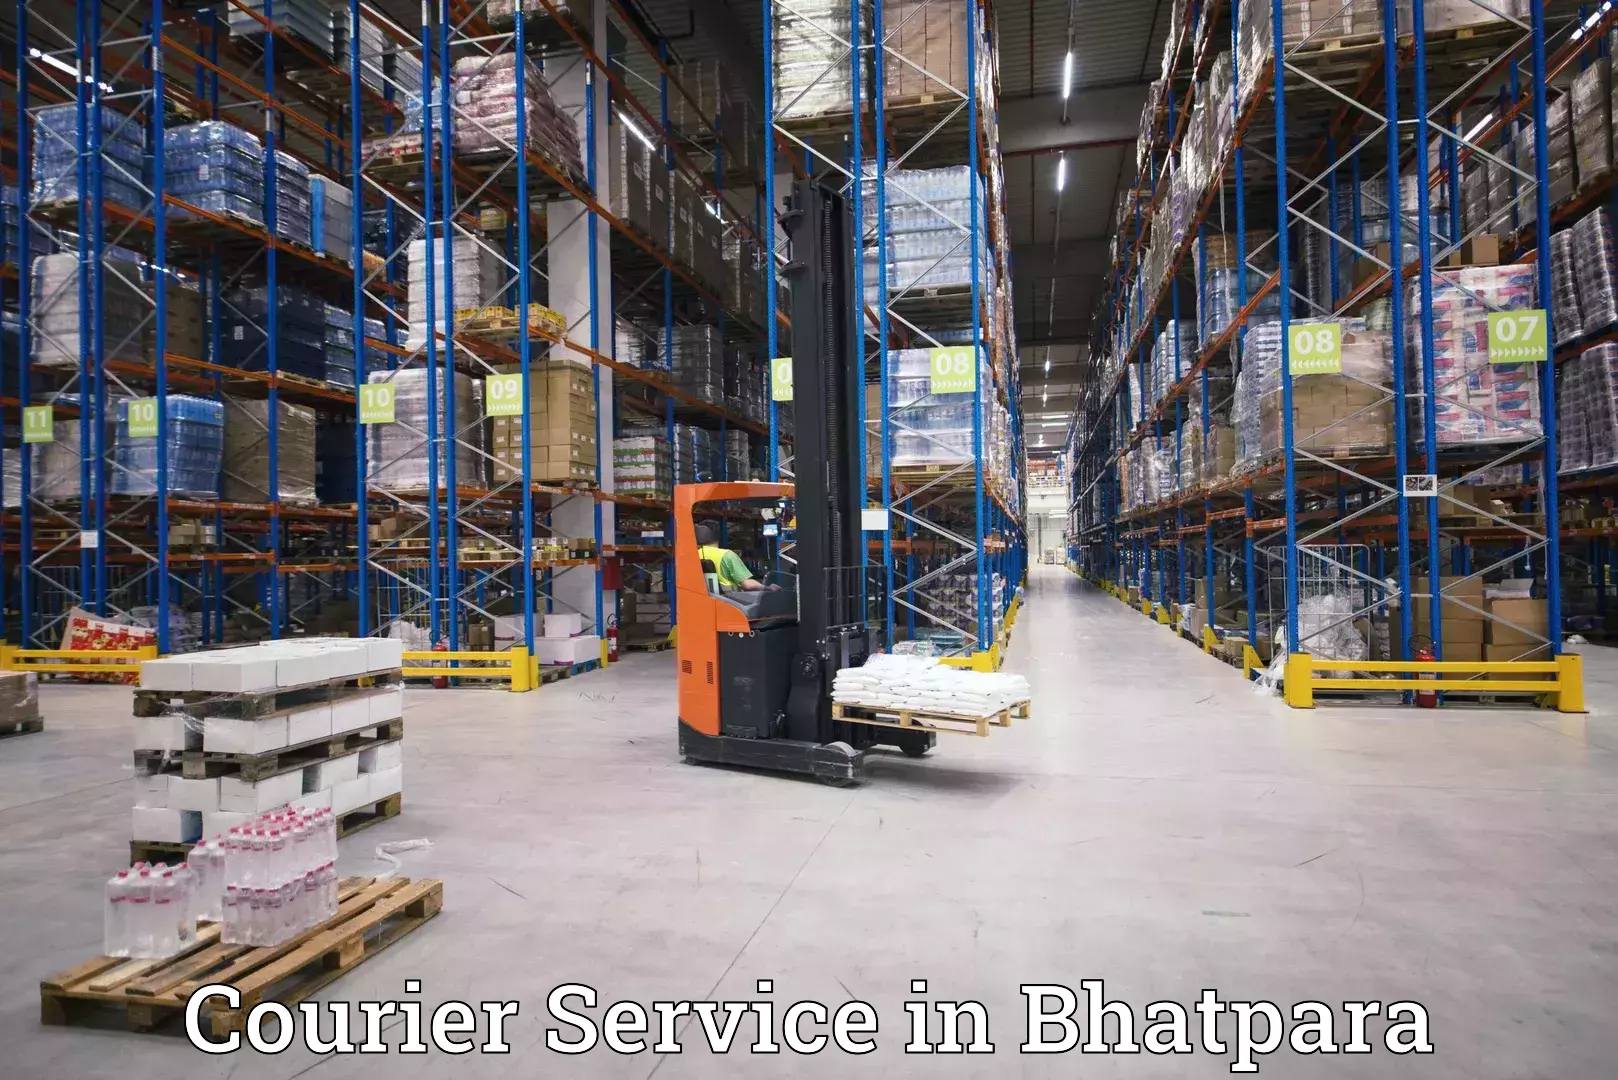 Seamless shipping experience in Bhatpara